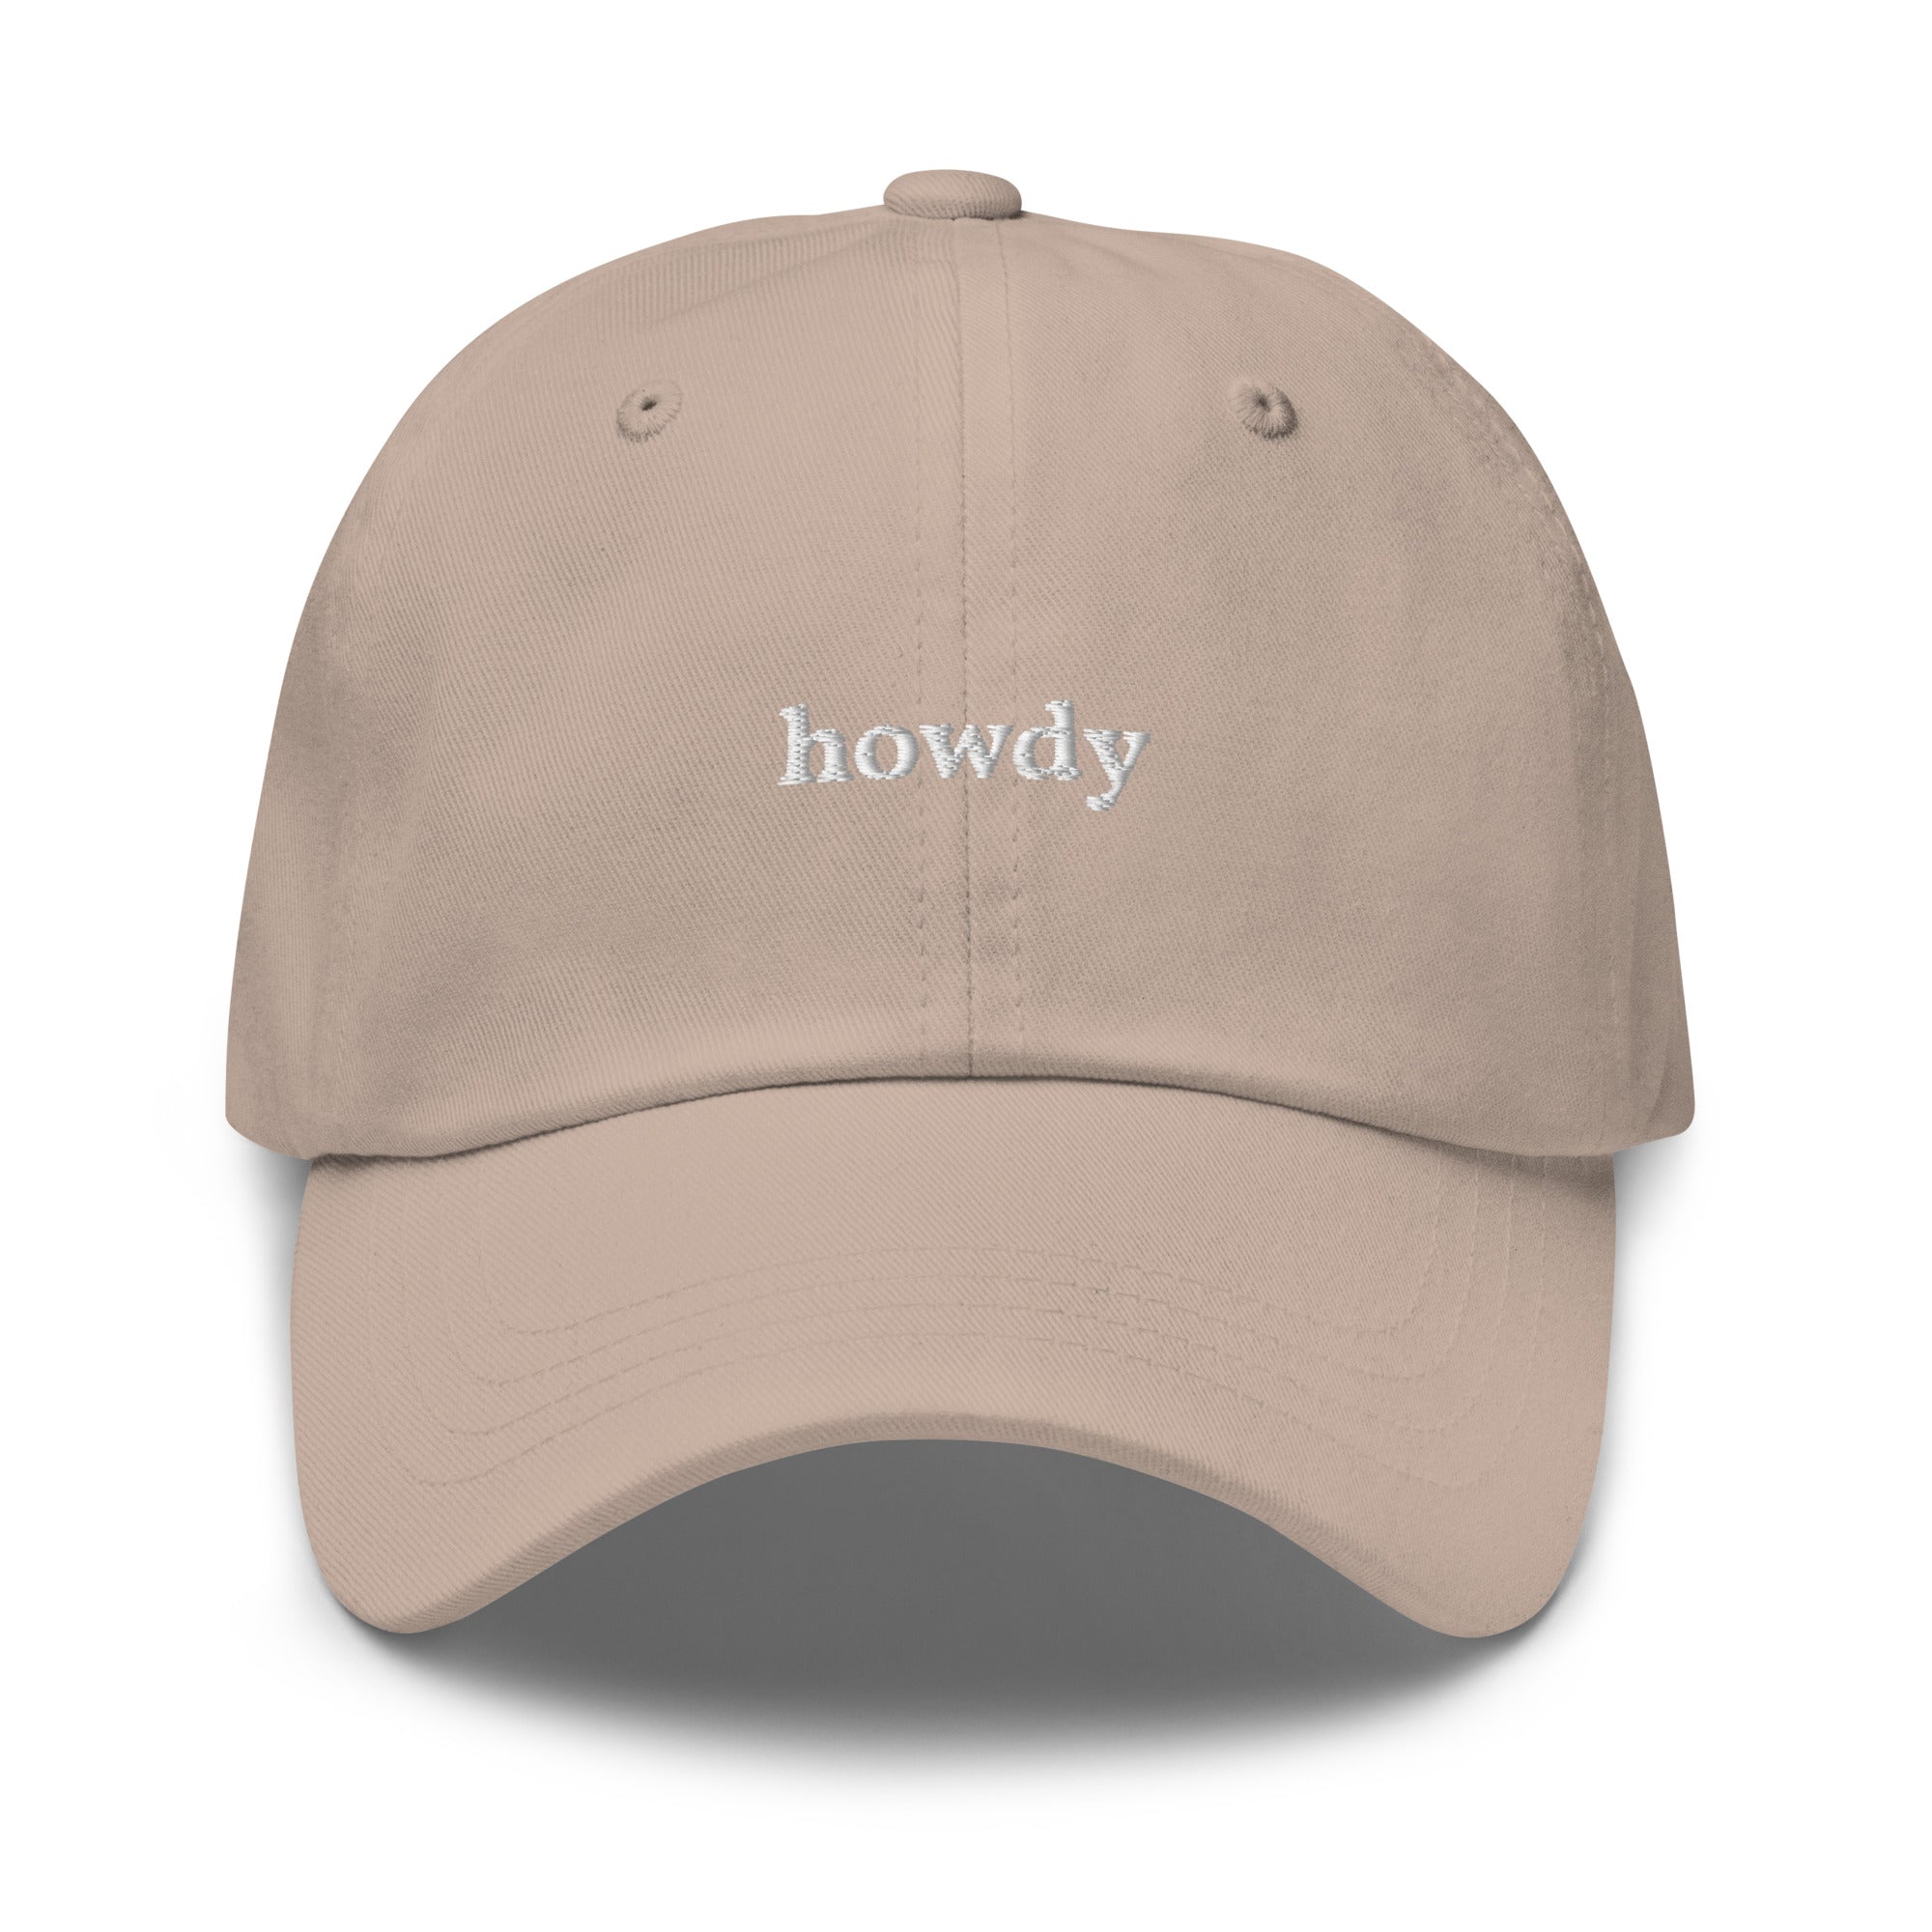 howdy dad hat